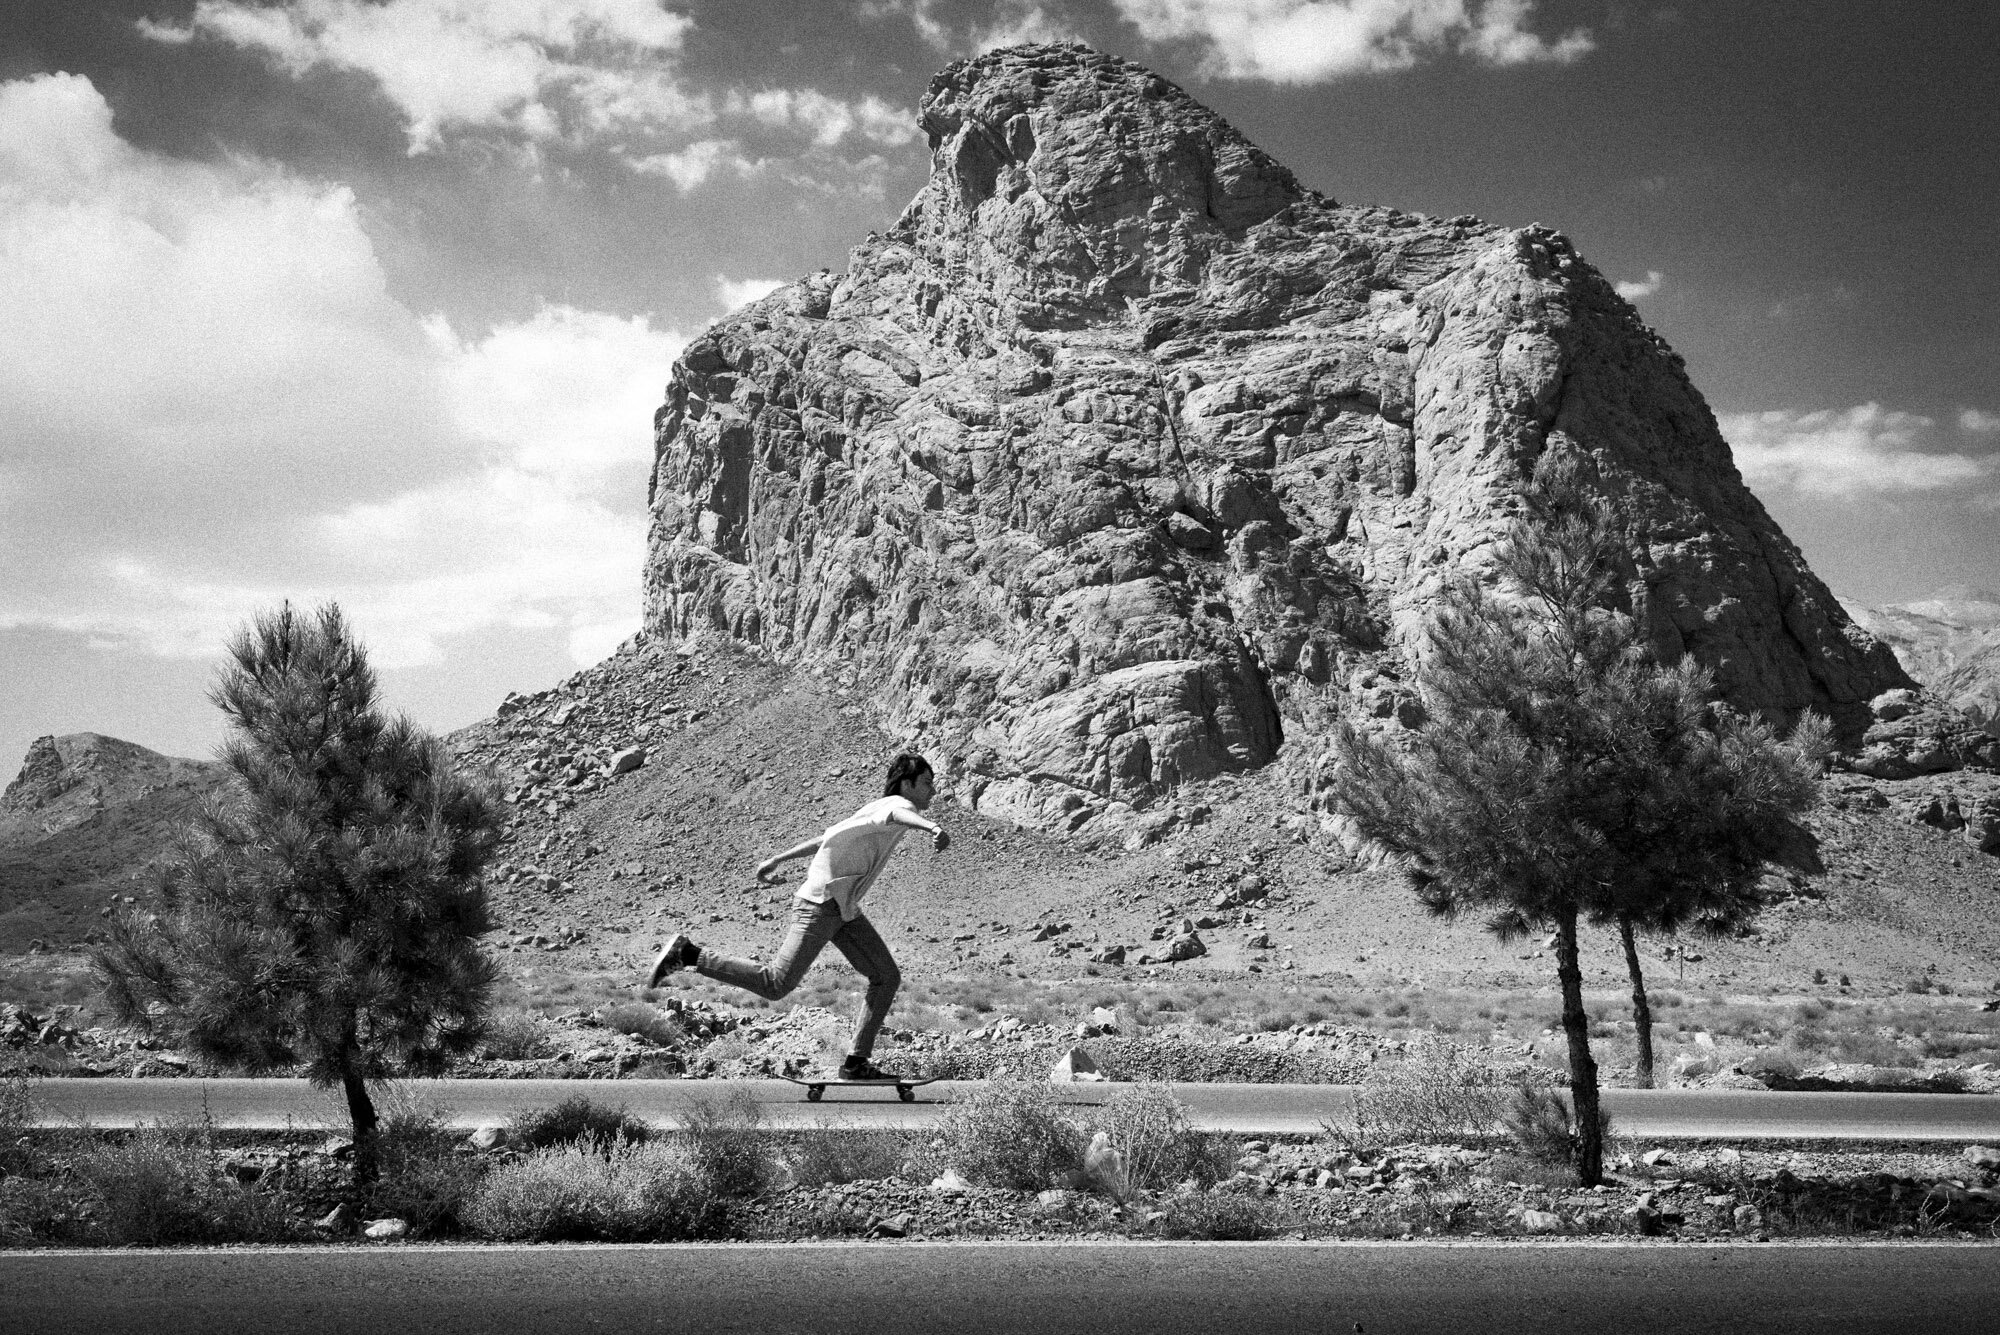  Mehrad, 18 years old, skateboards in front of the Eagle Mountain near Yazd, Iran, on October 1, 2015. 